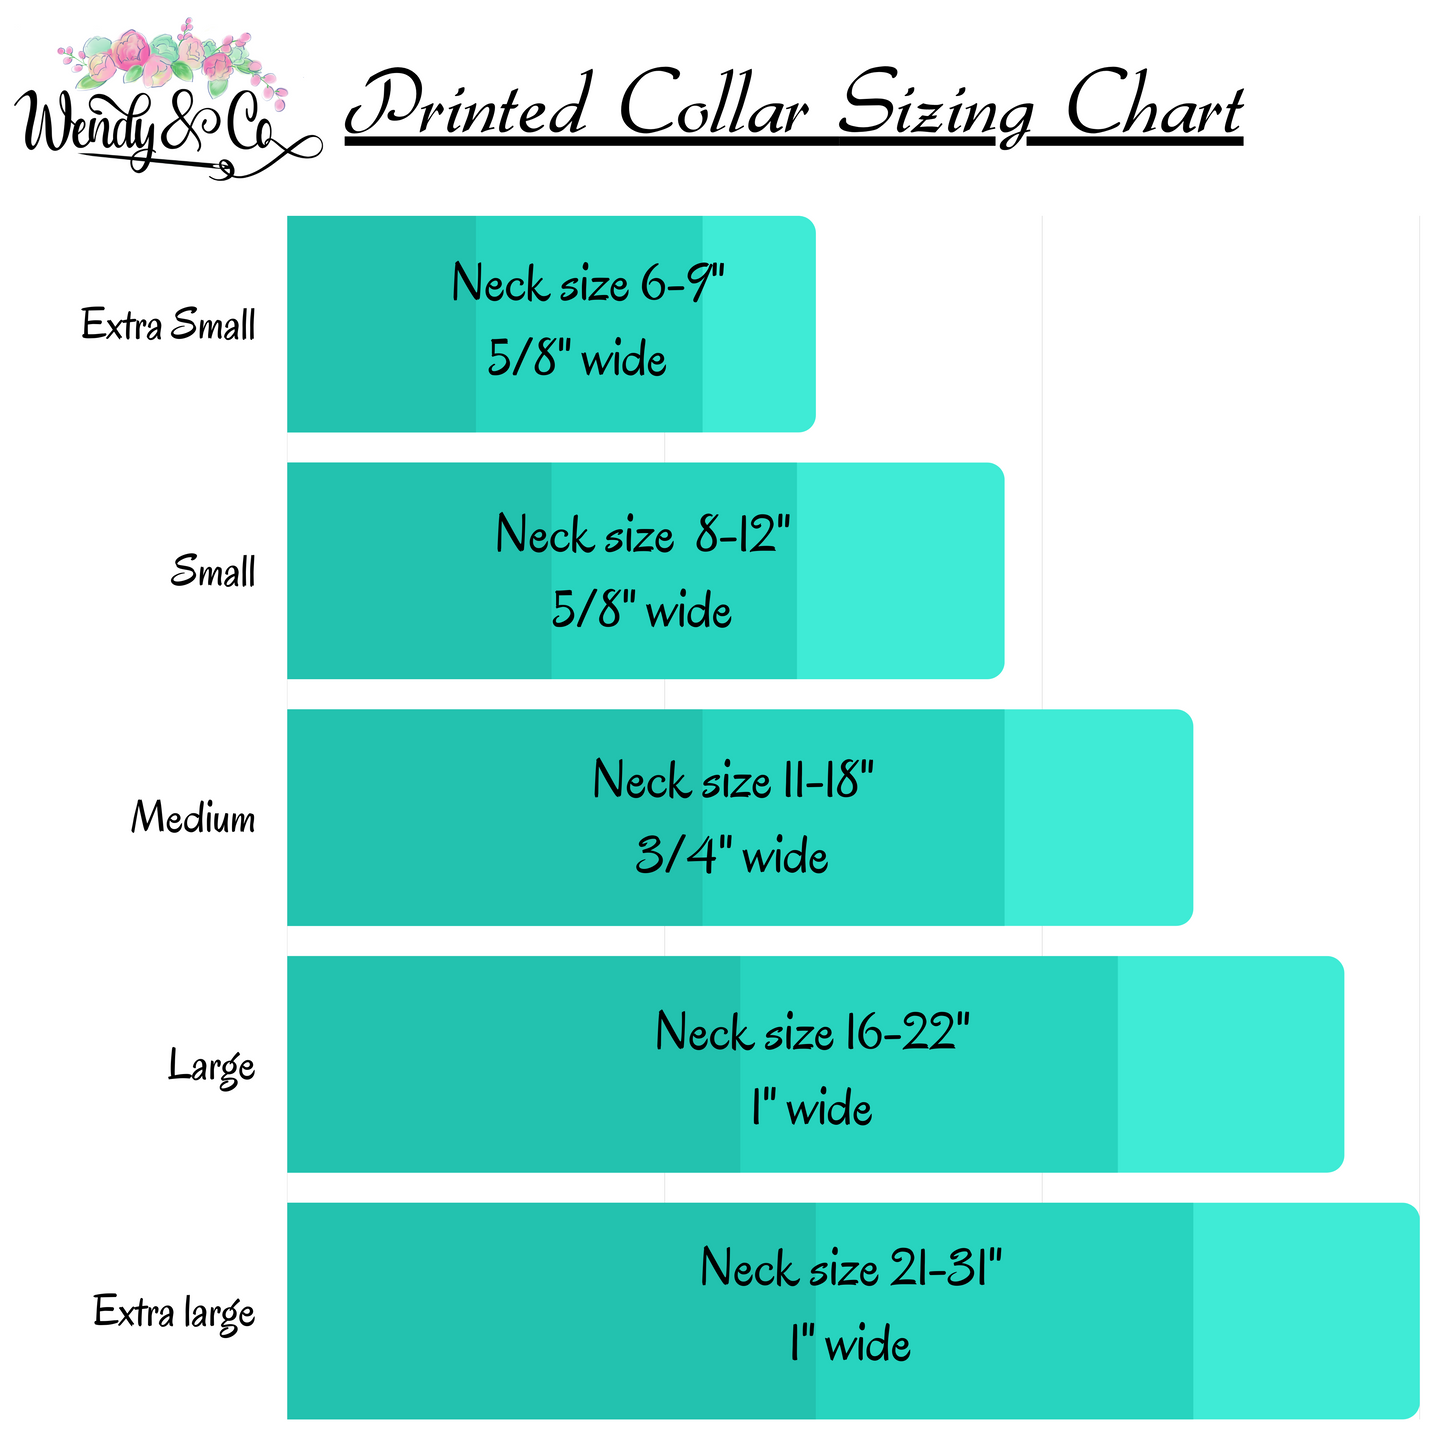 Printed Collar size chart.